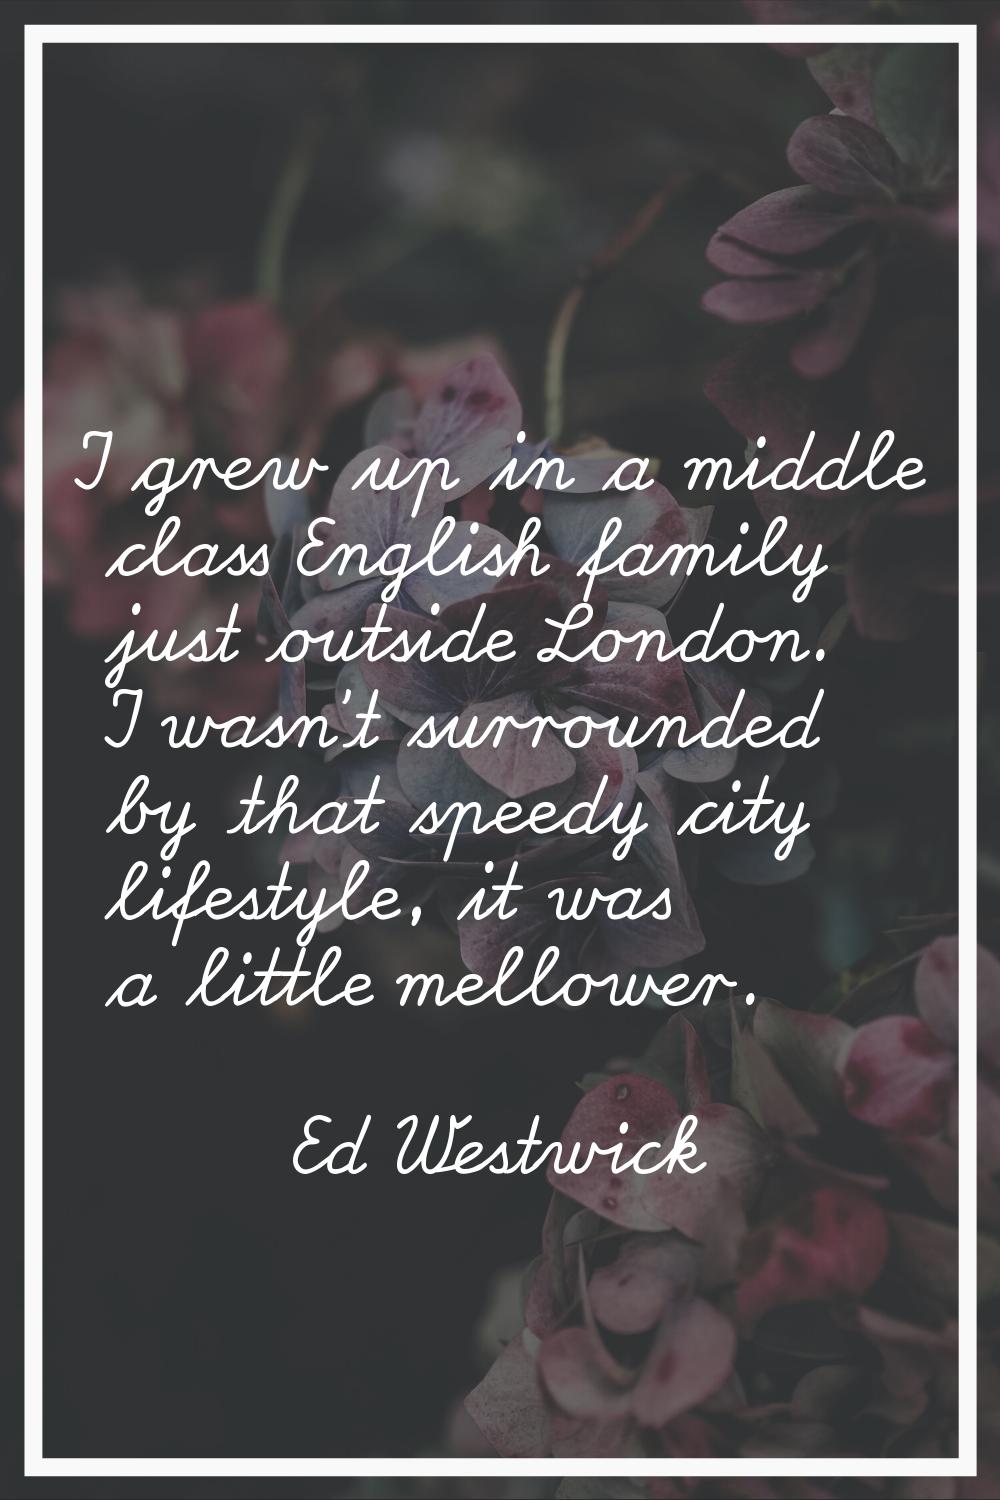 I grew up in a middle class English family just outside London. I wasn't surrounded by that speedy 